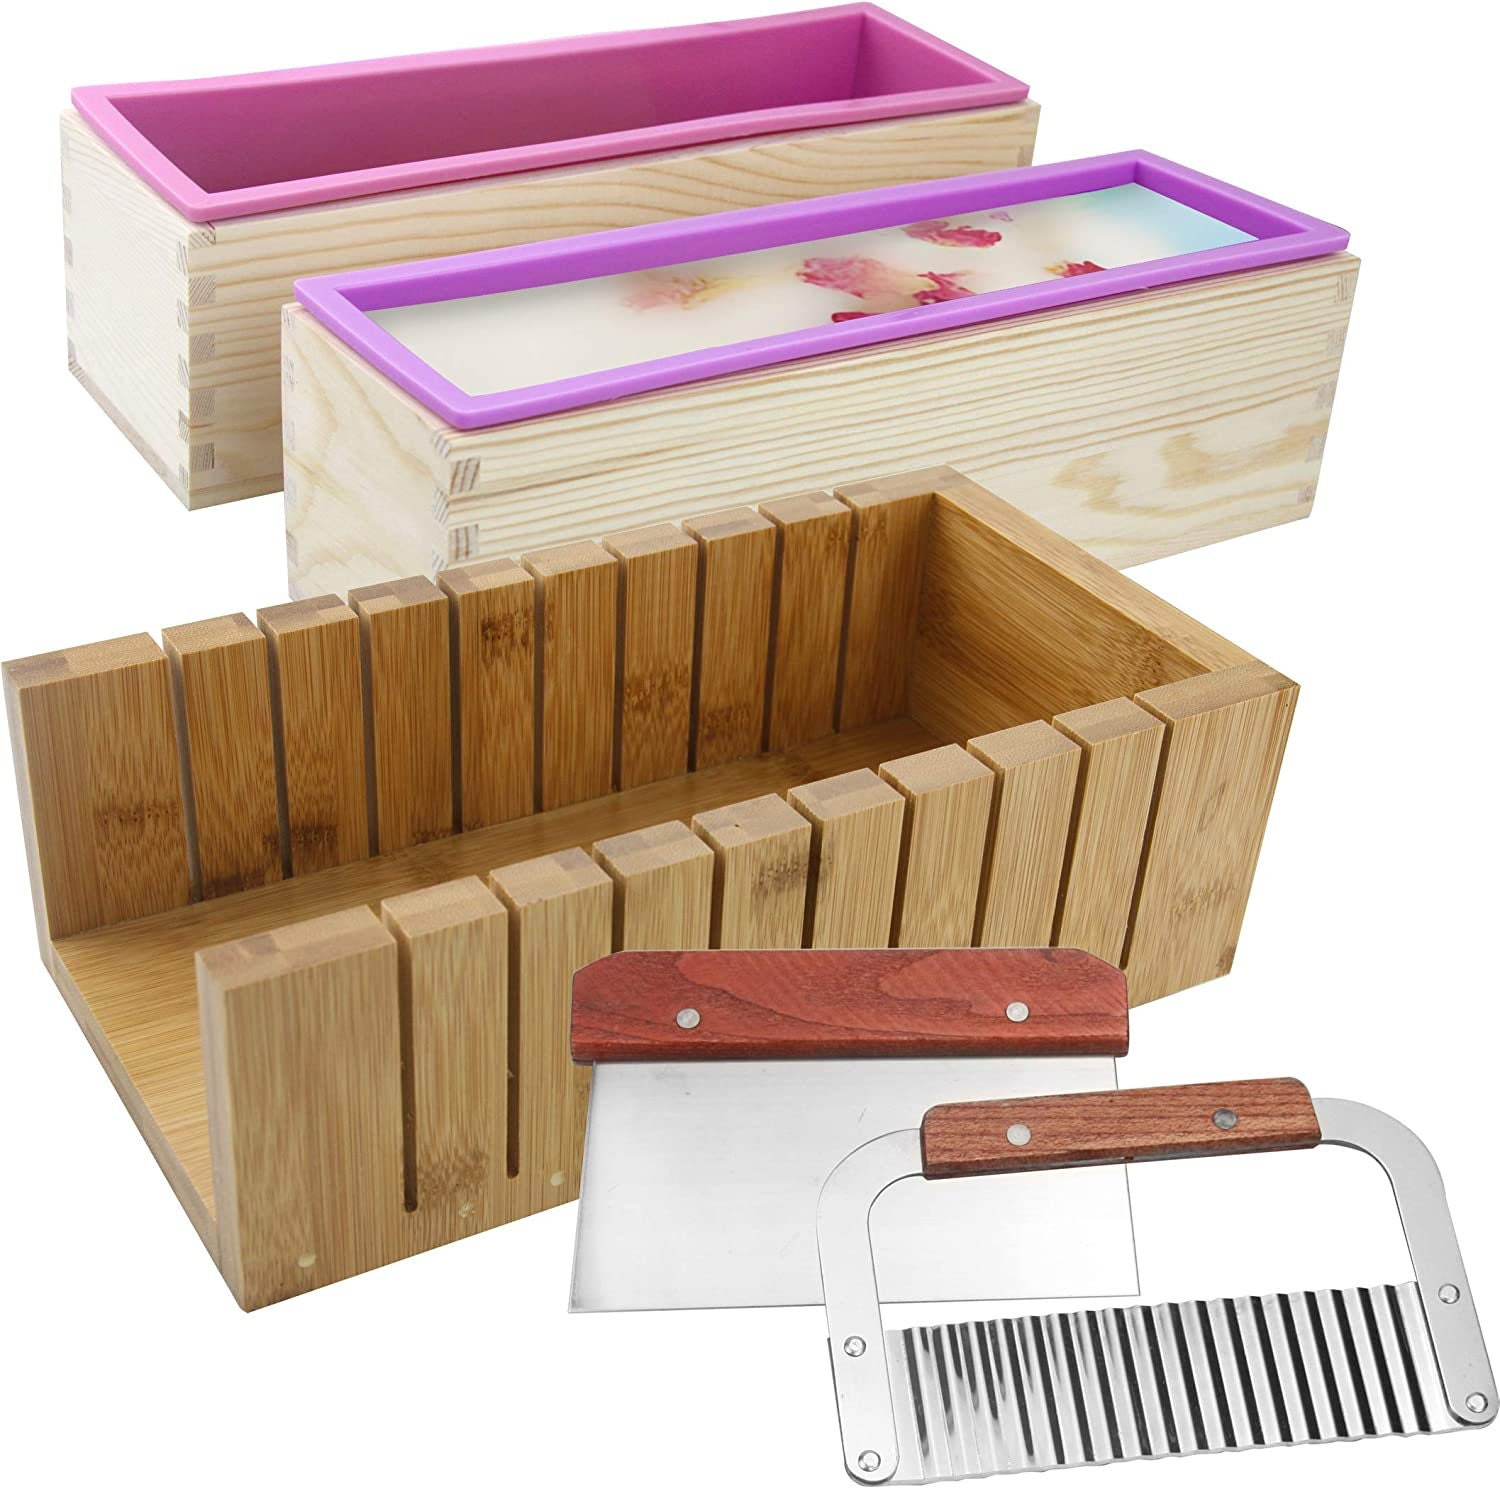 Soap Making Mold Loaf Baking Wooden Box Cutter Slicer Tool Set Wavy  Straight NEW